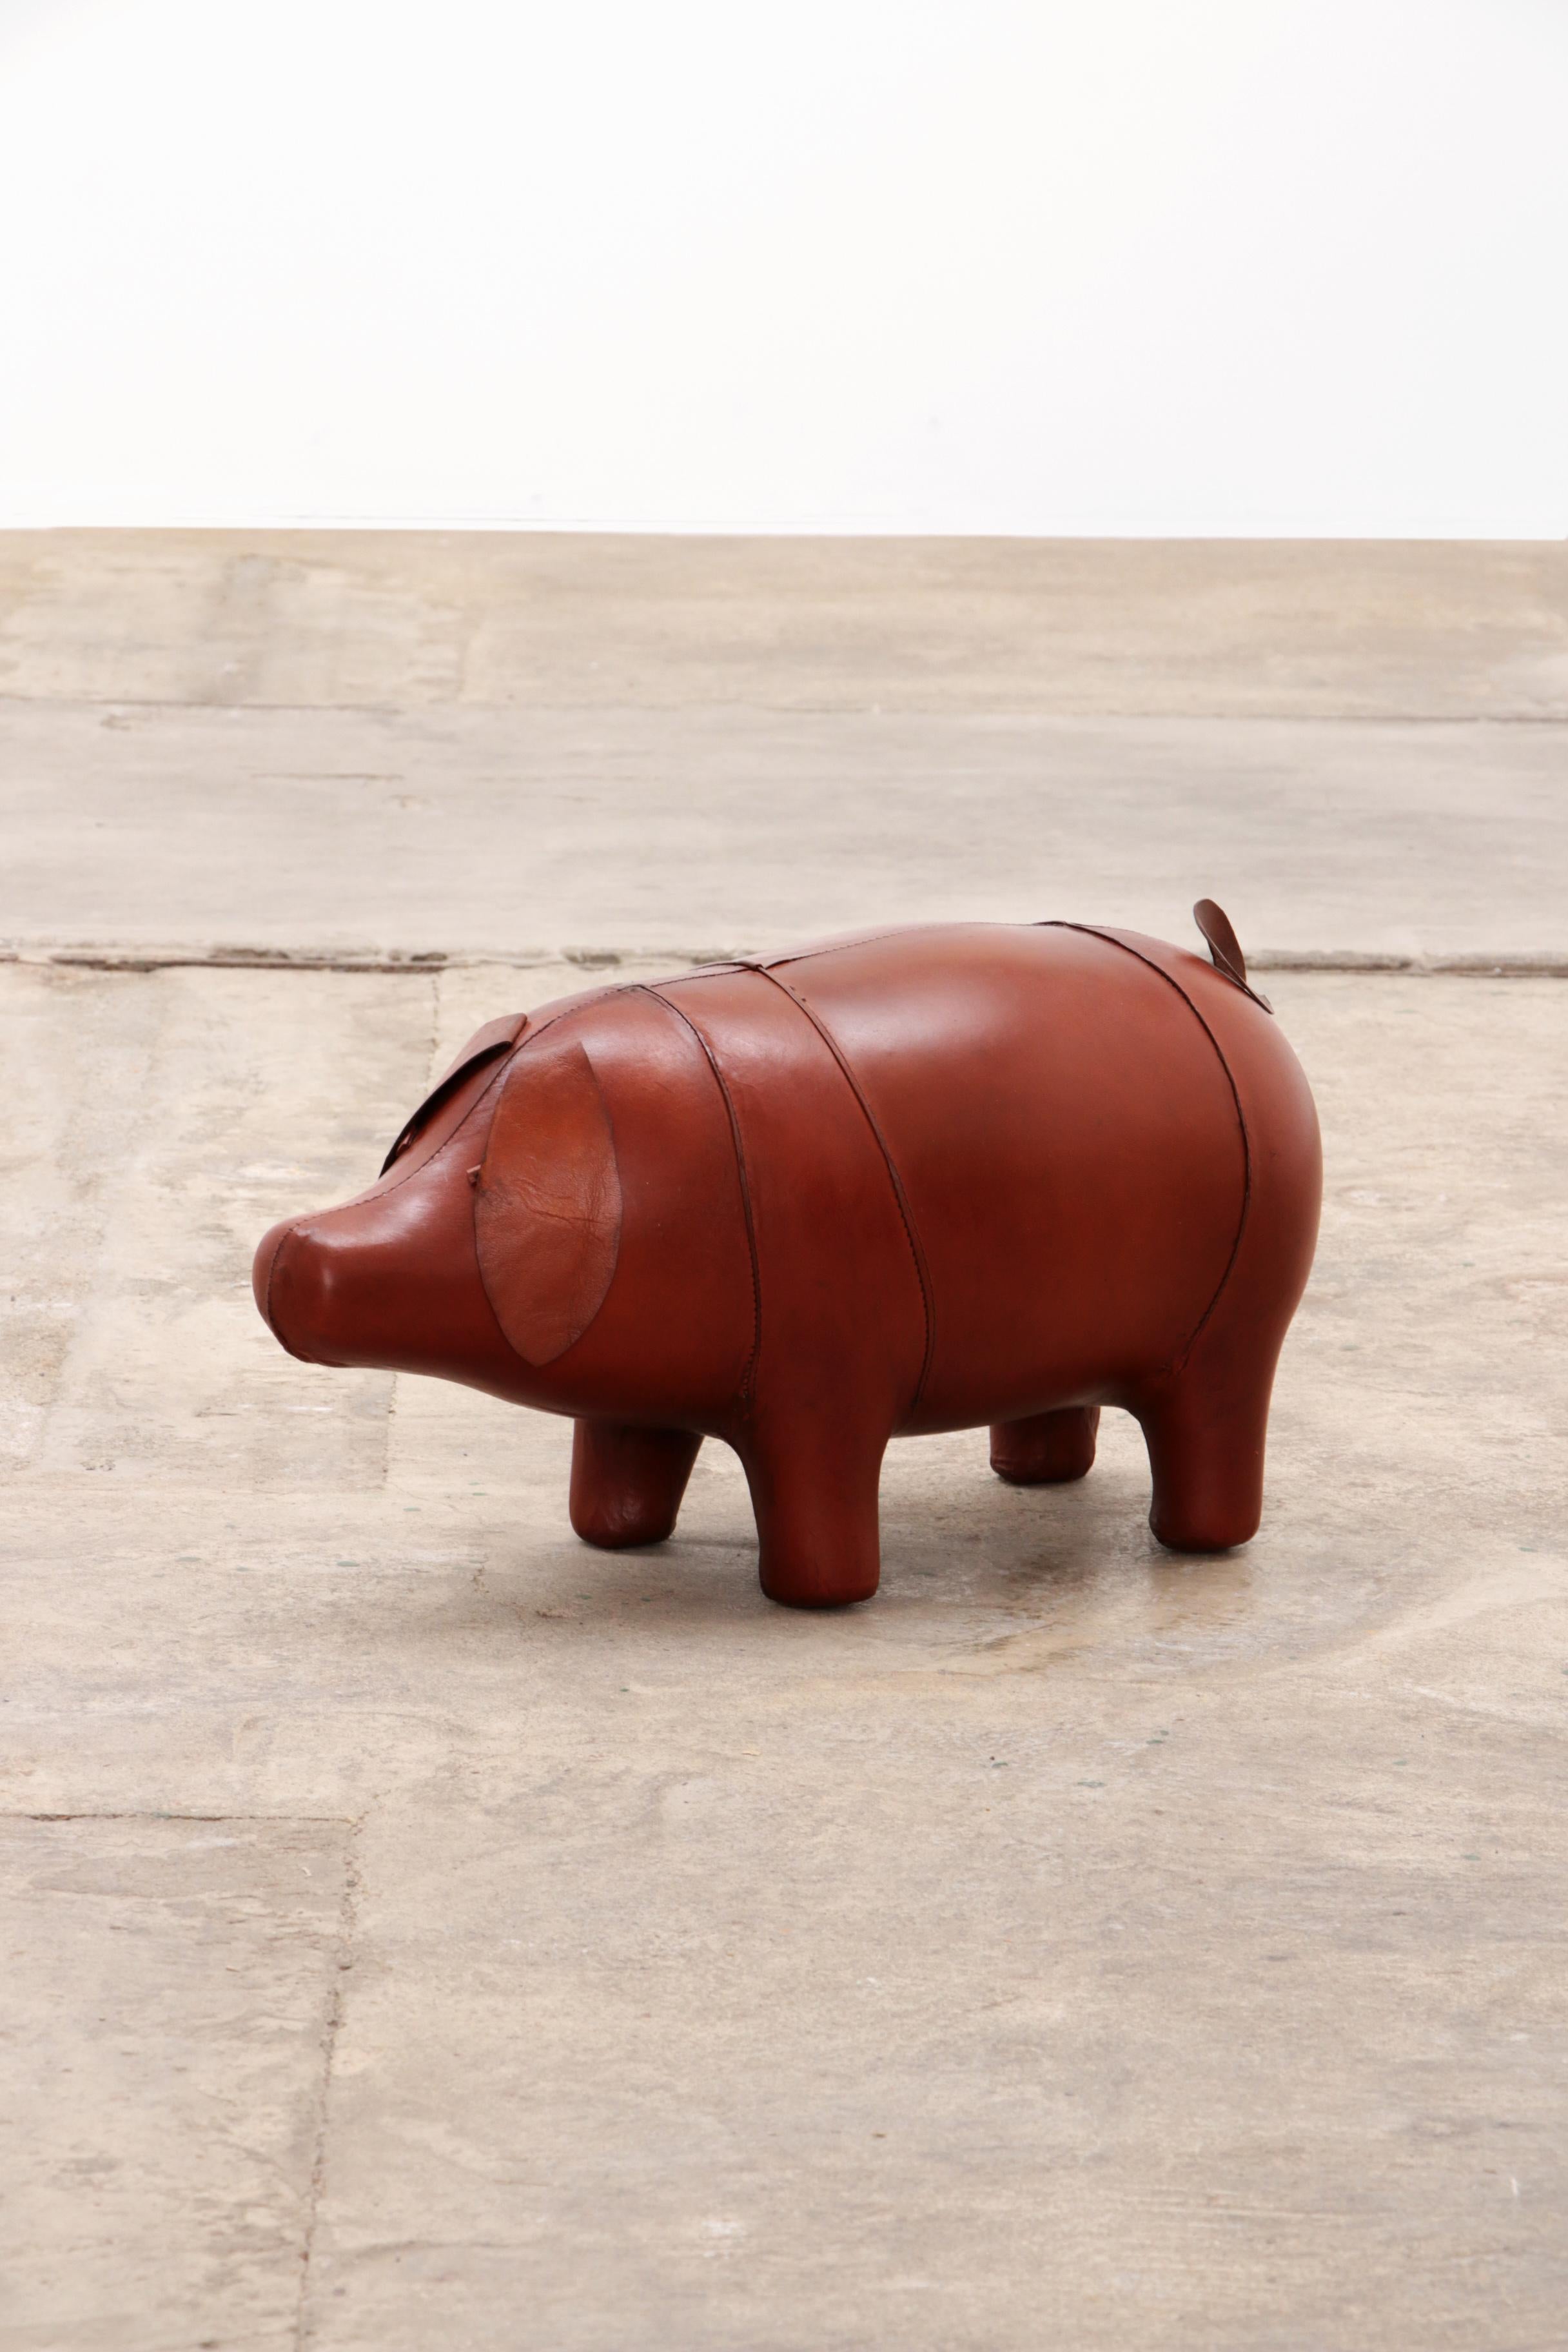 They are still being made, this one will have been made around 1970. This ottoman in the shape of a pig was first produced around 1930 in England by 